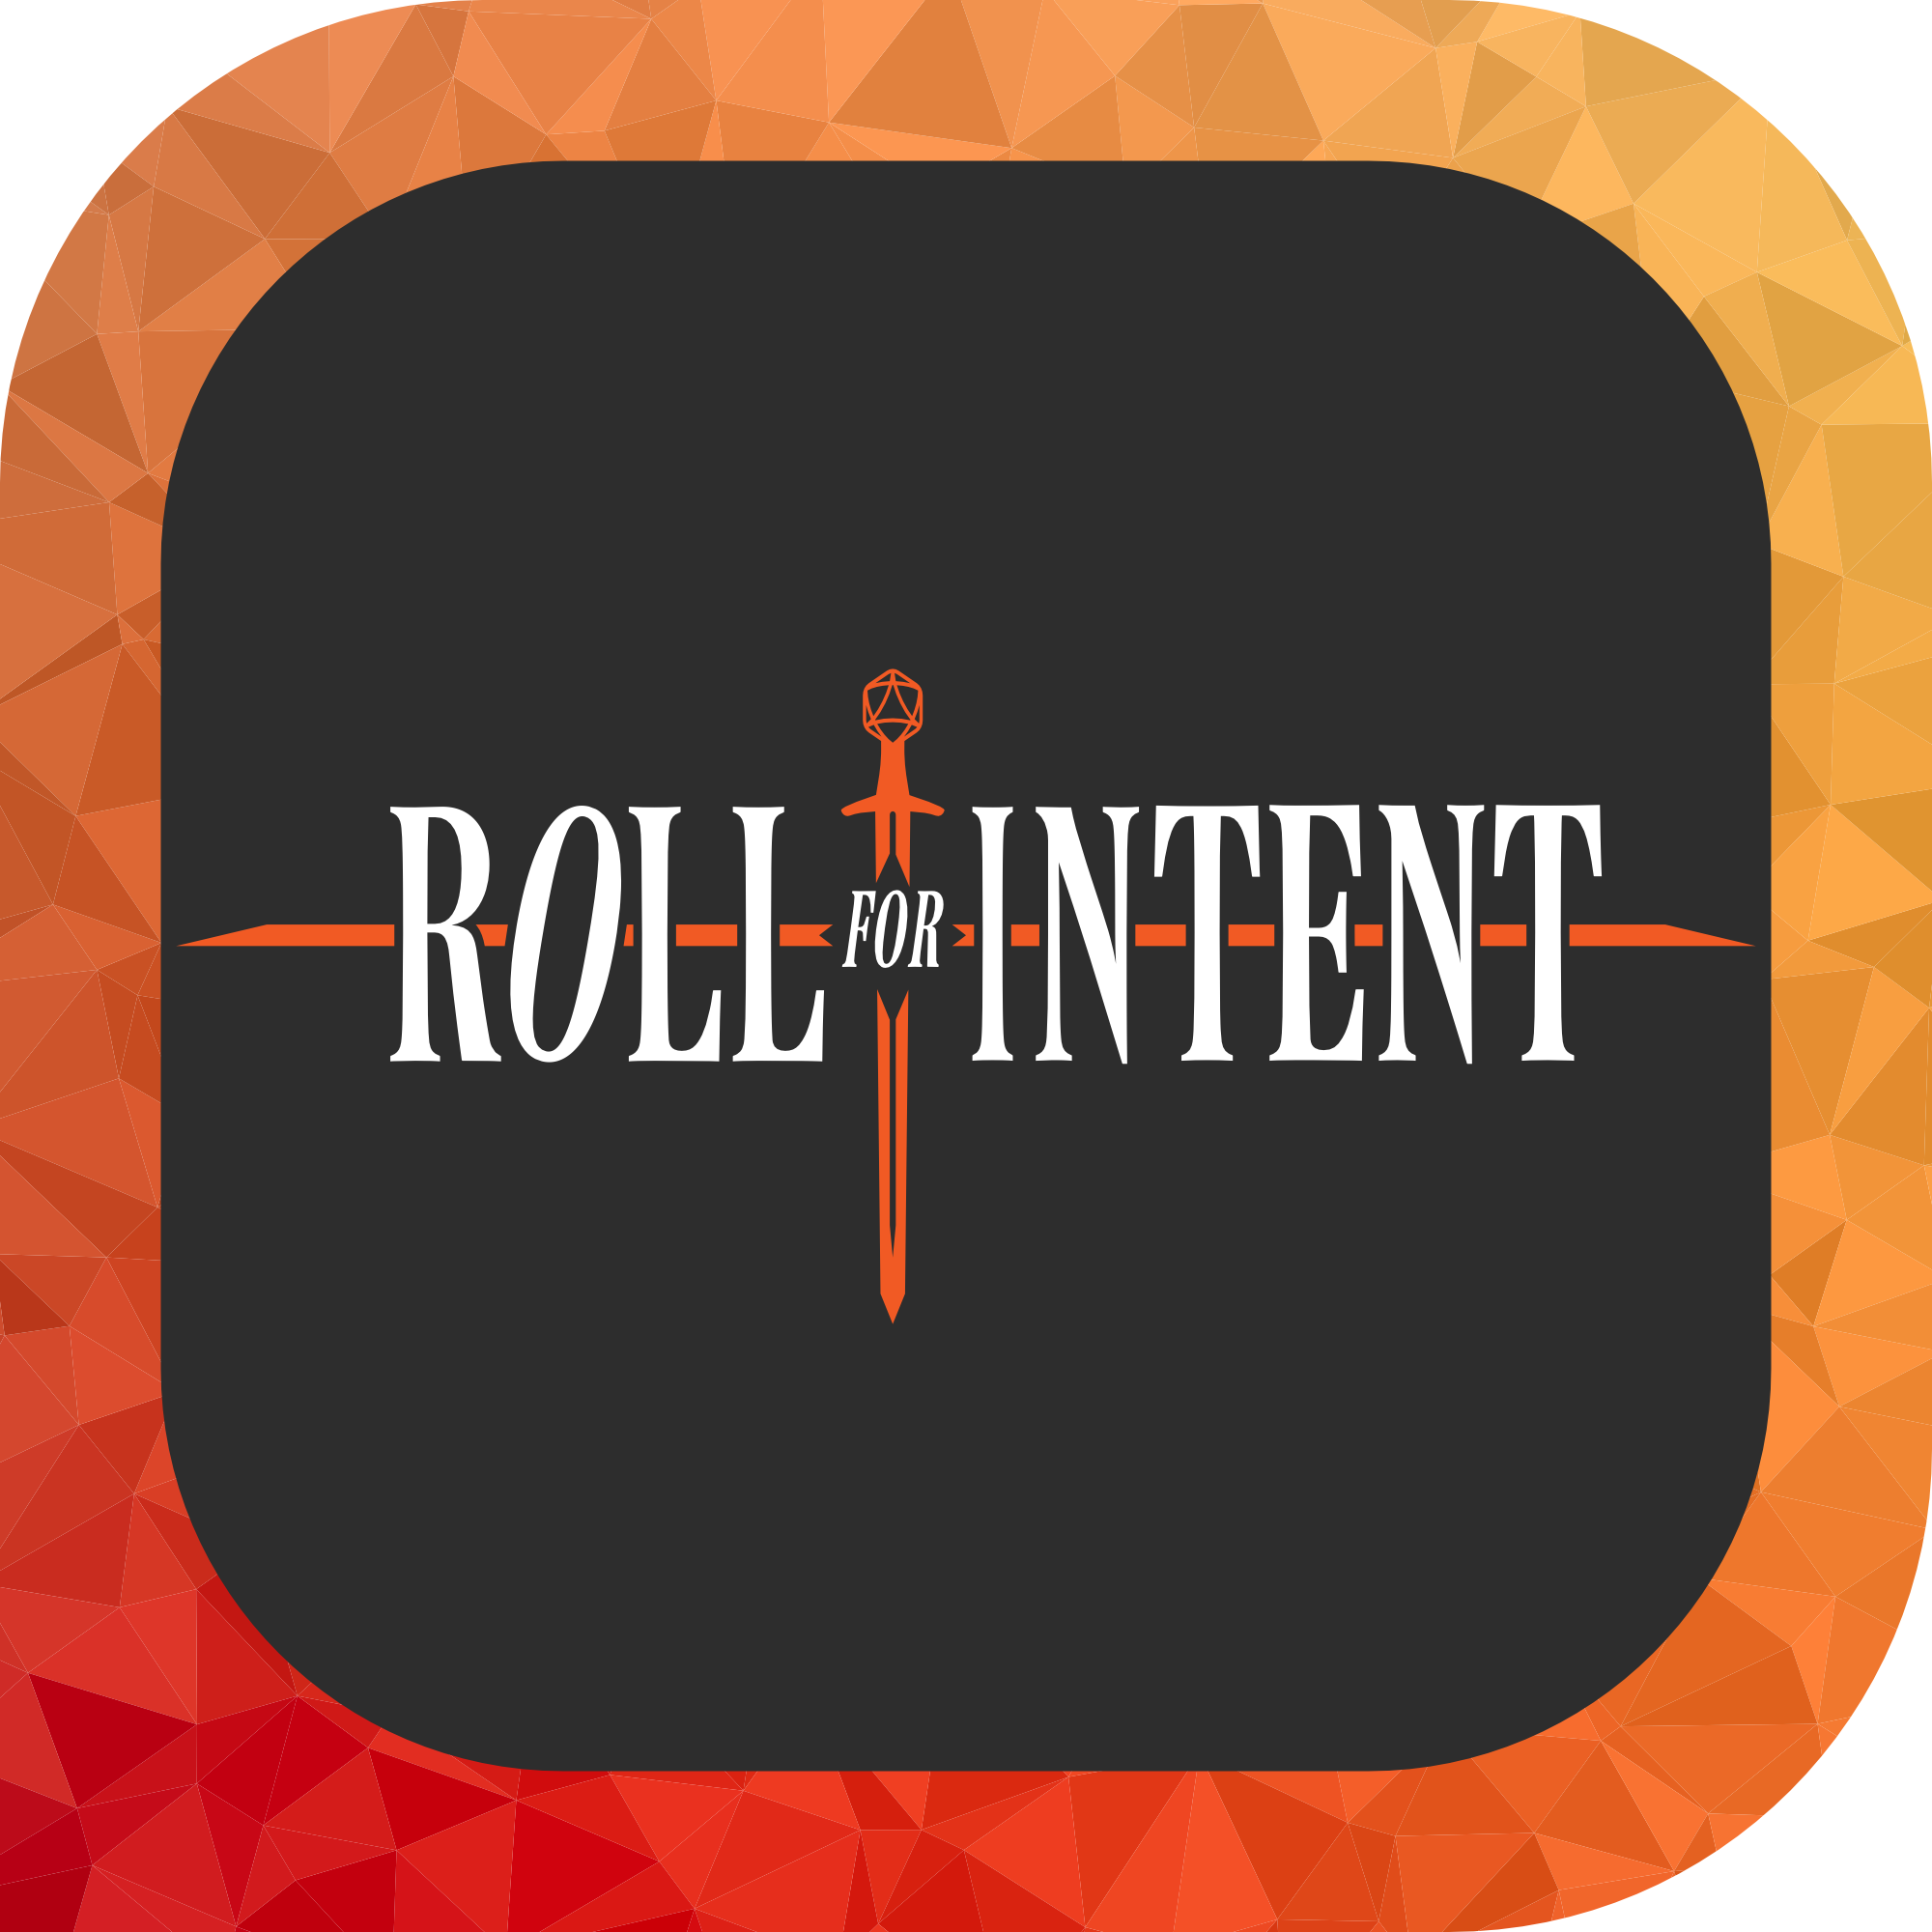 Artwork for podcast Roll For Intent